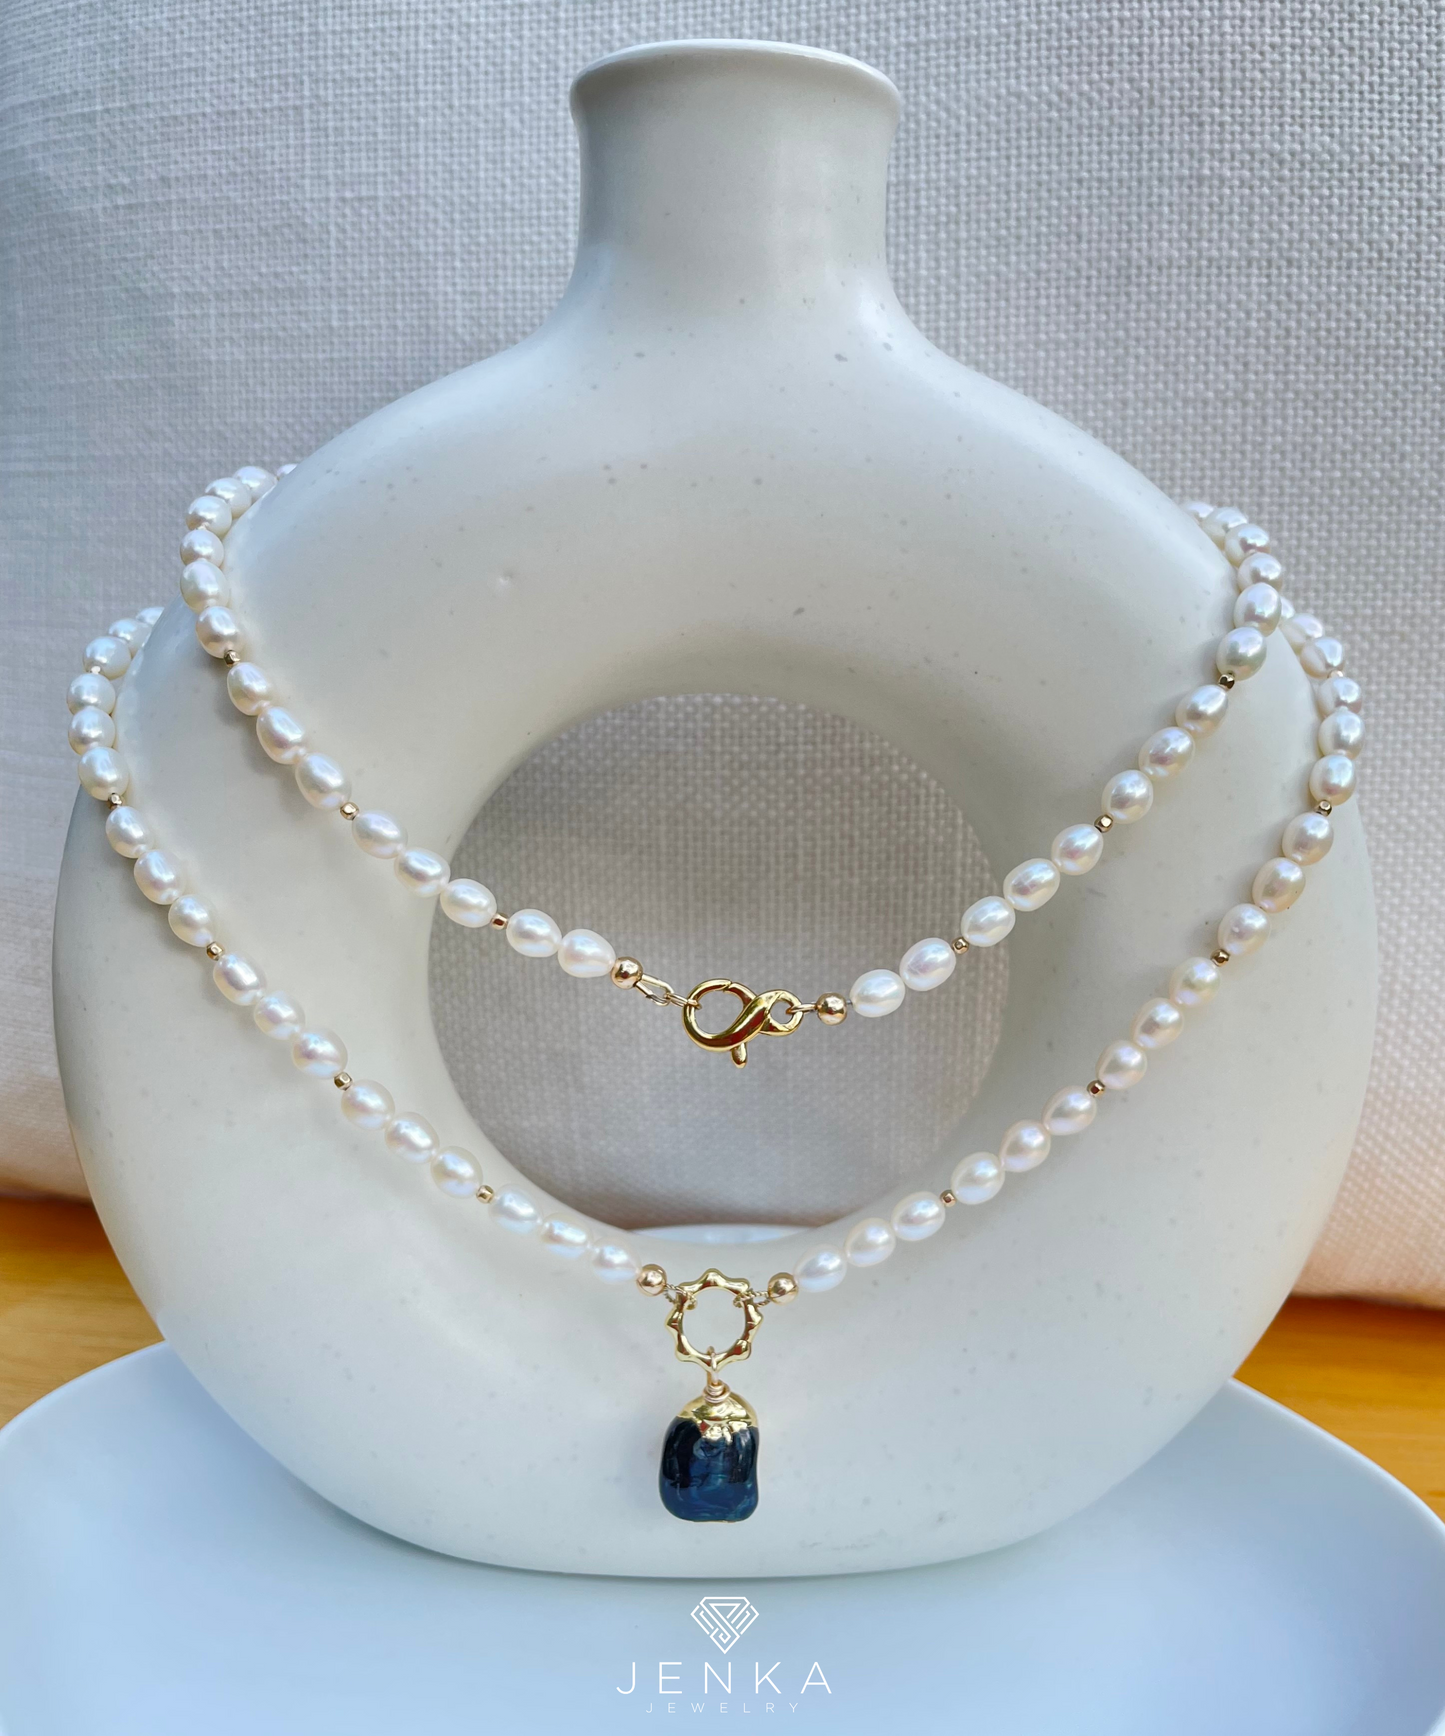 Oval Pearl Necklace with Peacock Baroque Pendant